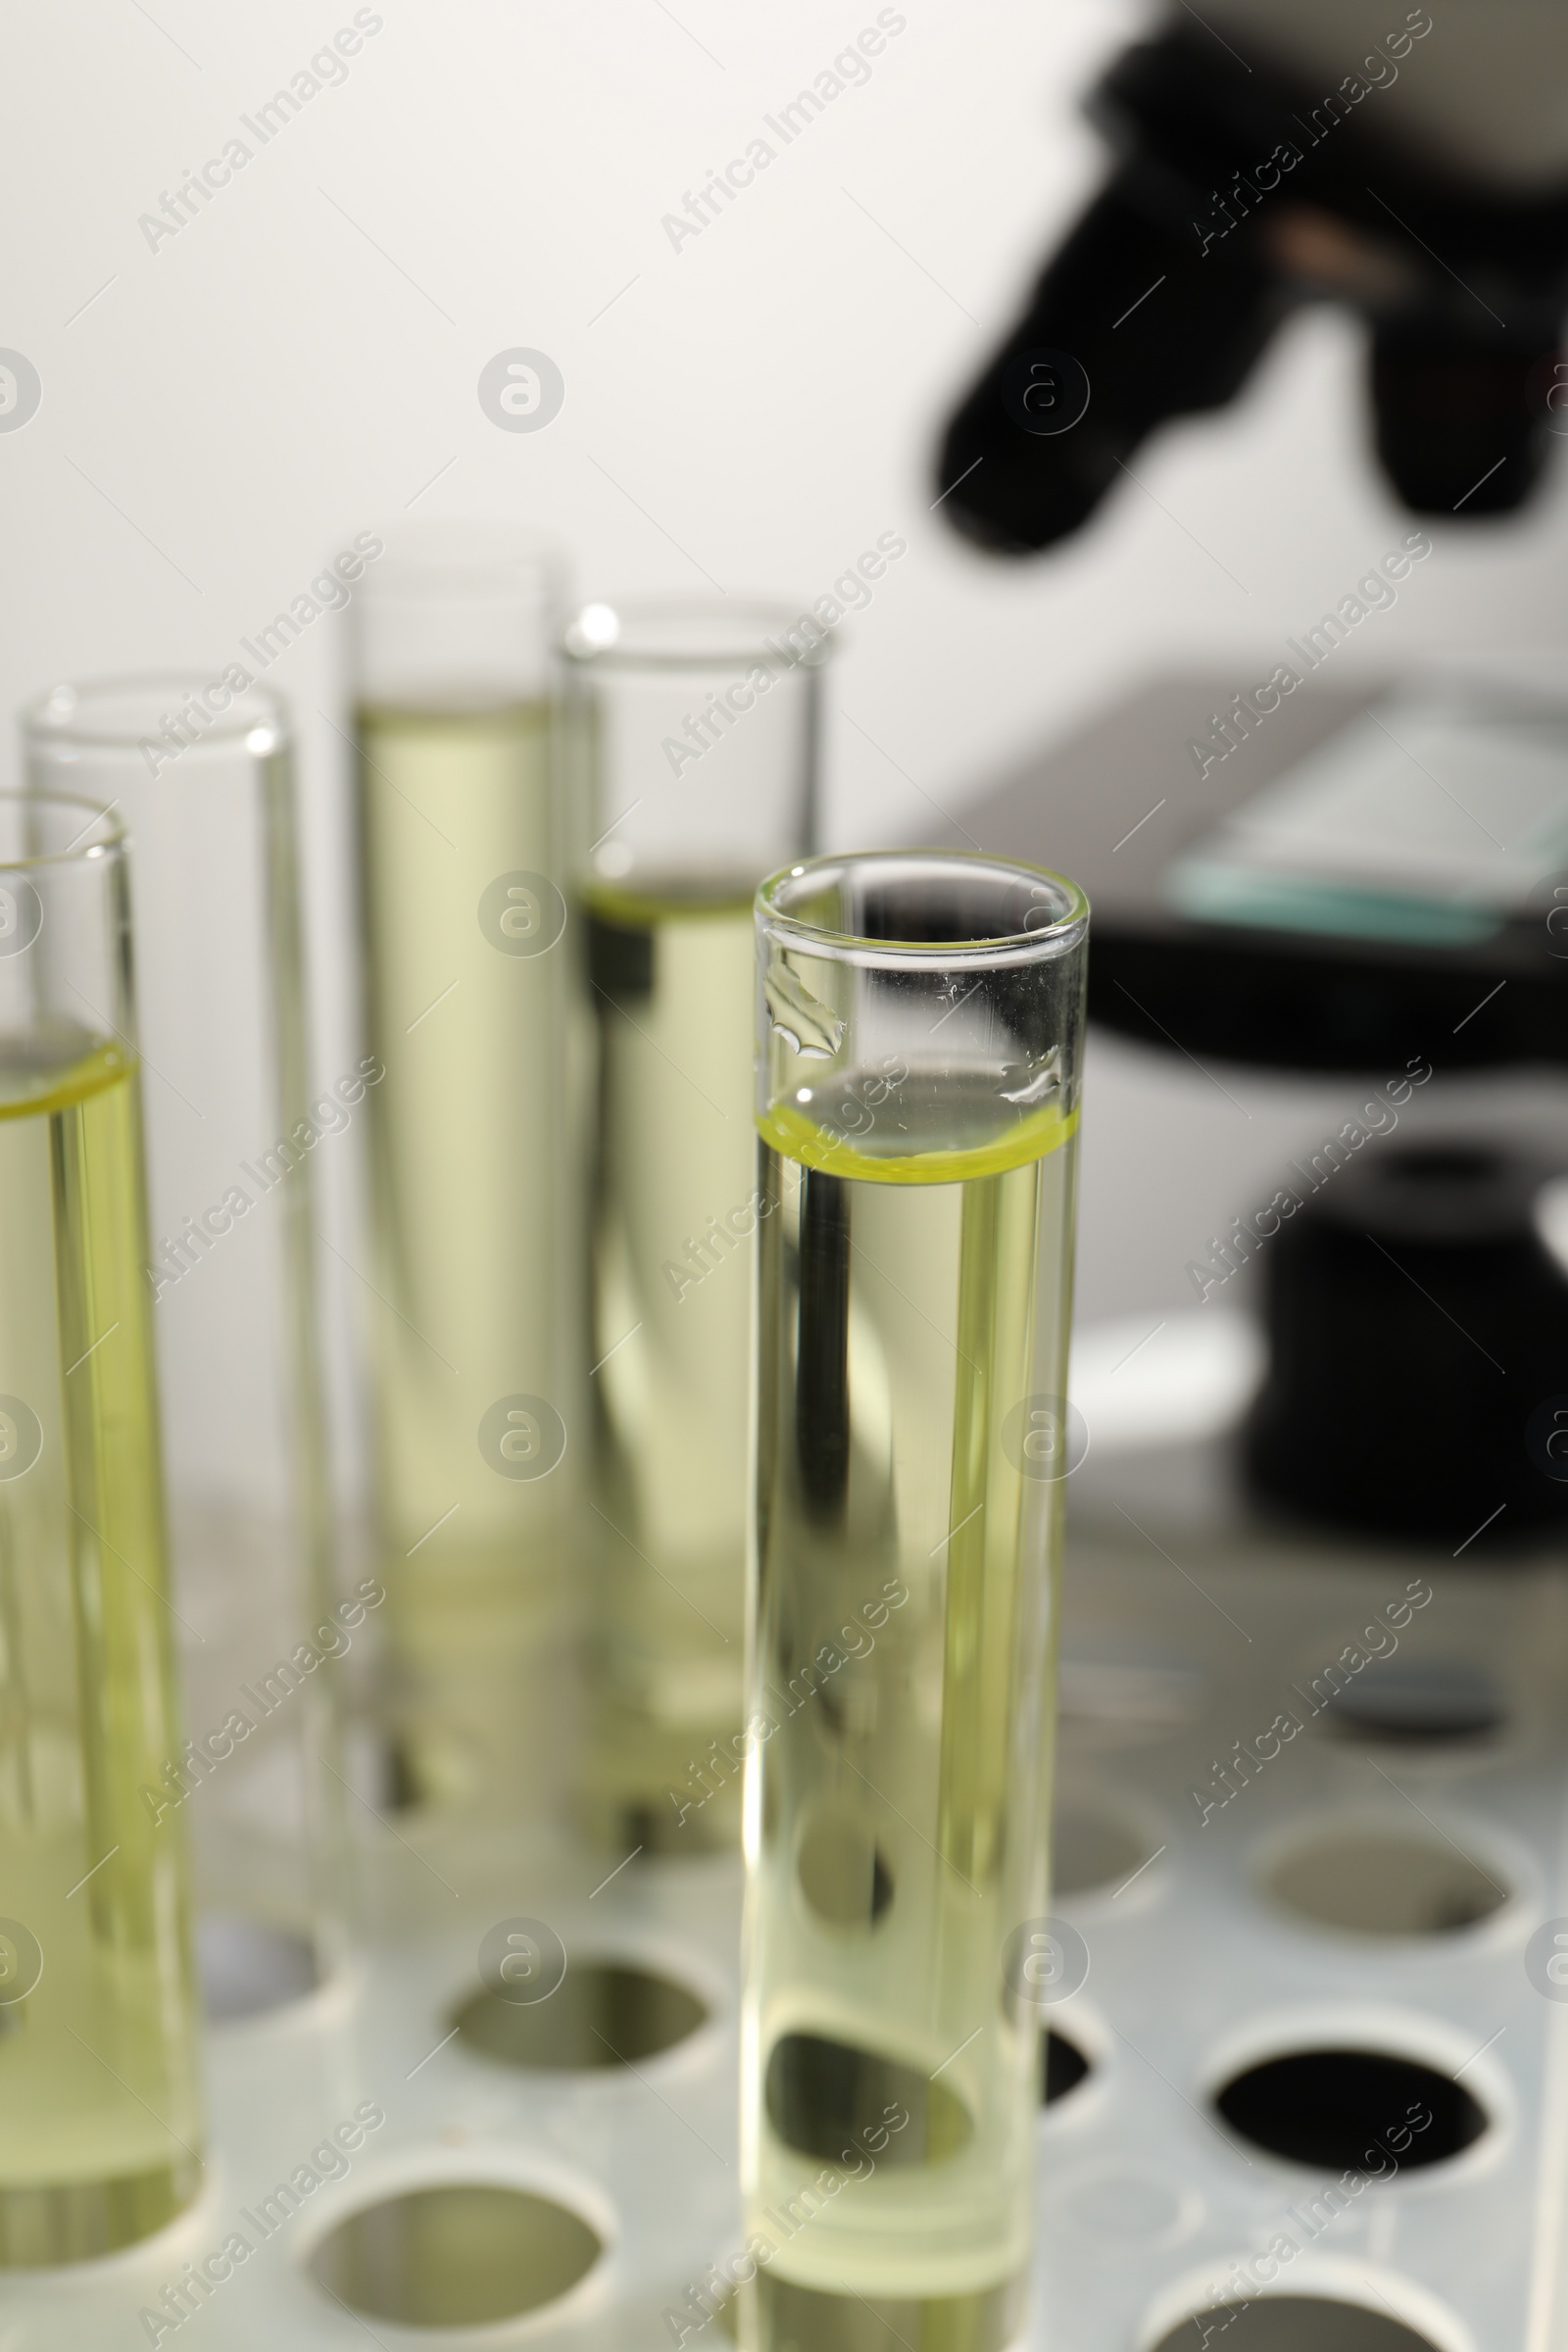 Photo of Test tubes with urine samples for analysis in holder on grey background, closeup